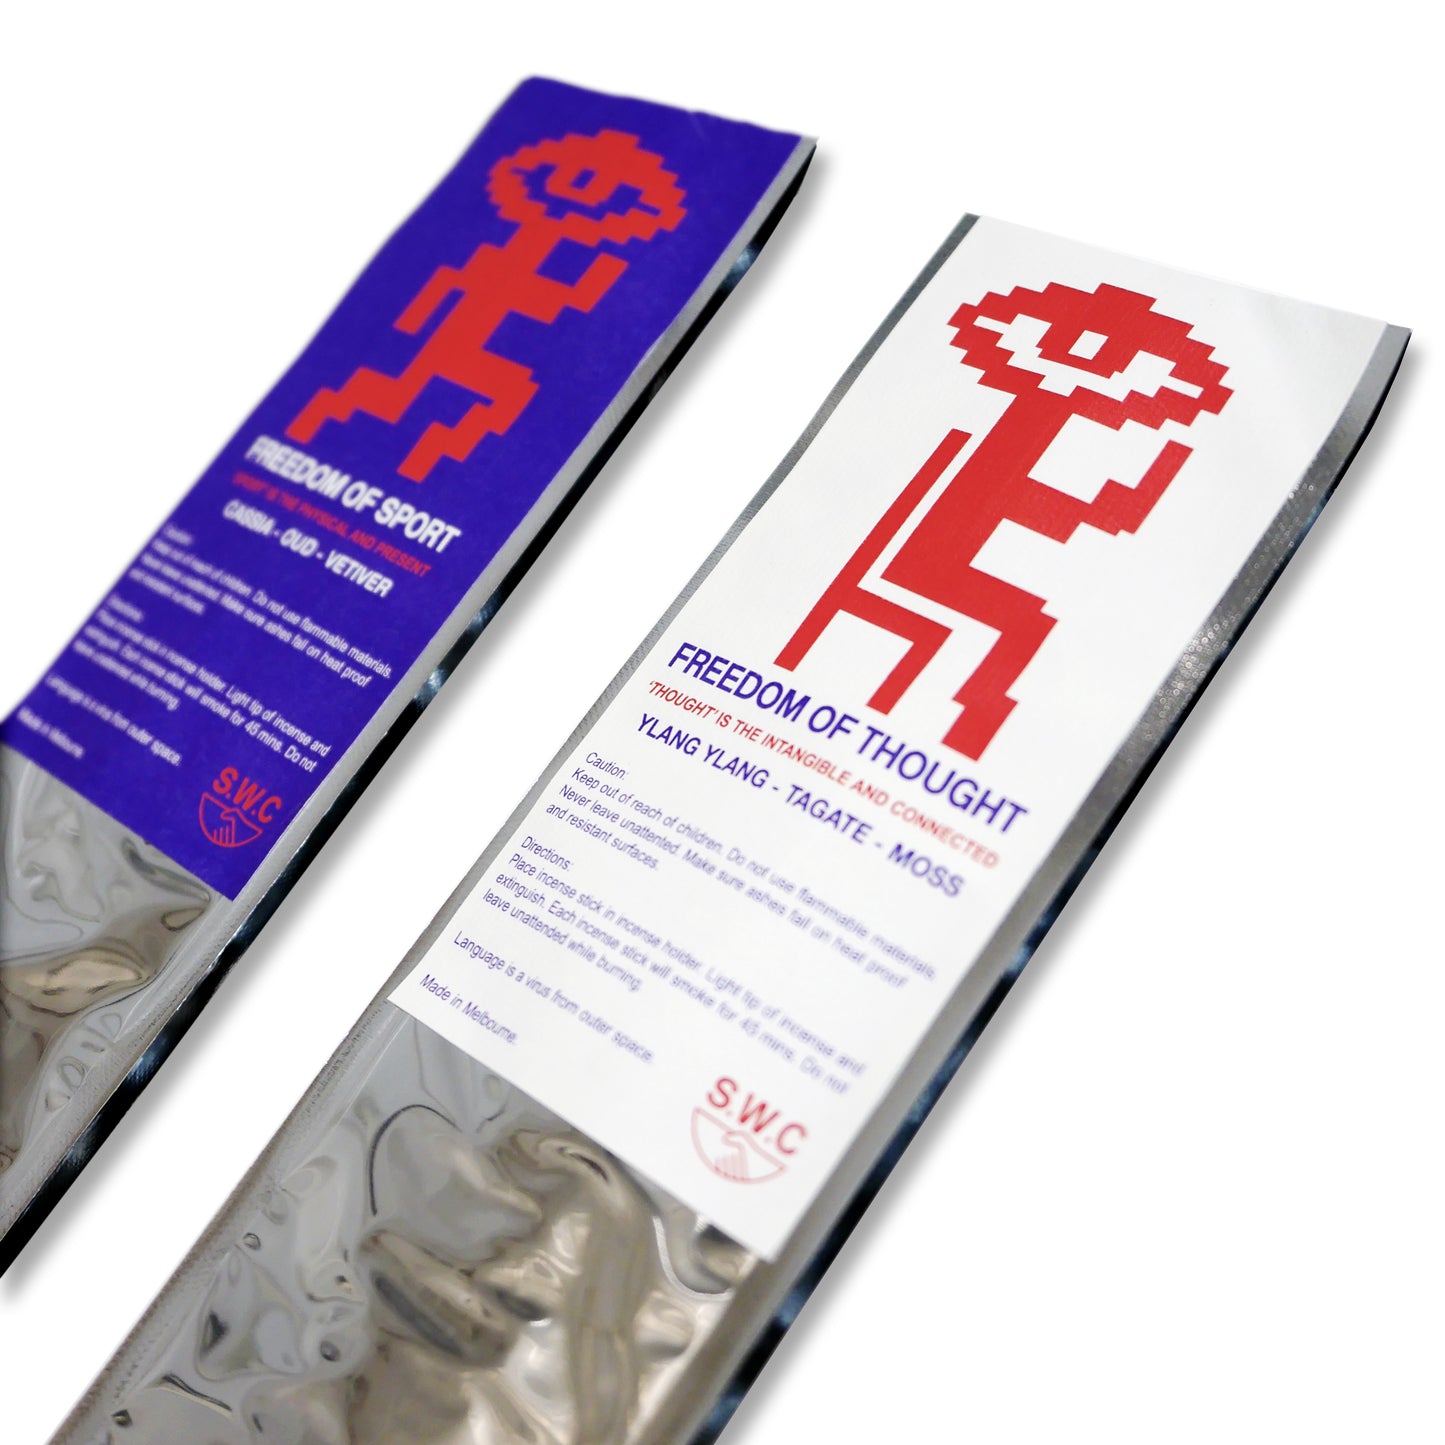 S.W.C & AGARIC 'FOS-FOT' INCENSE TWIN-PACK